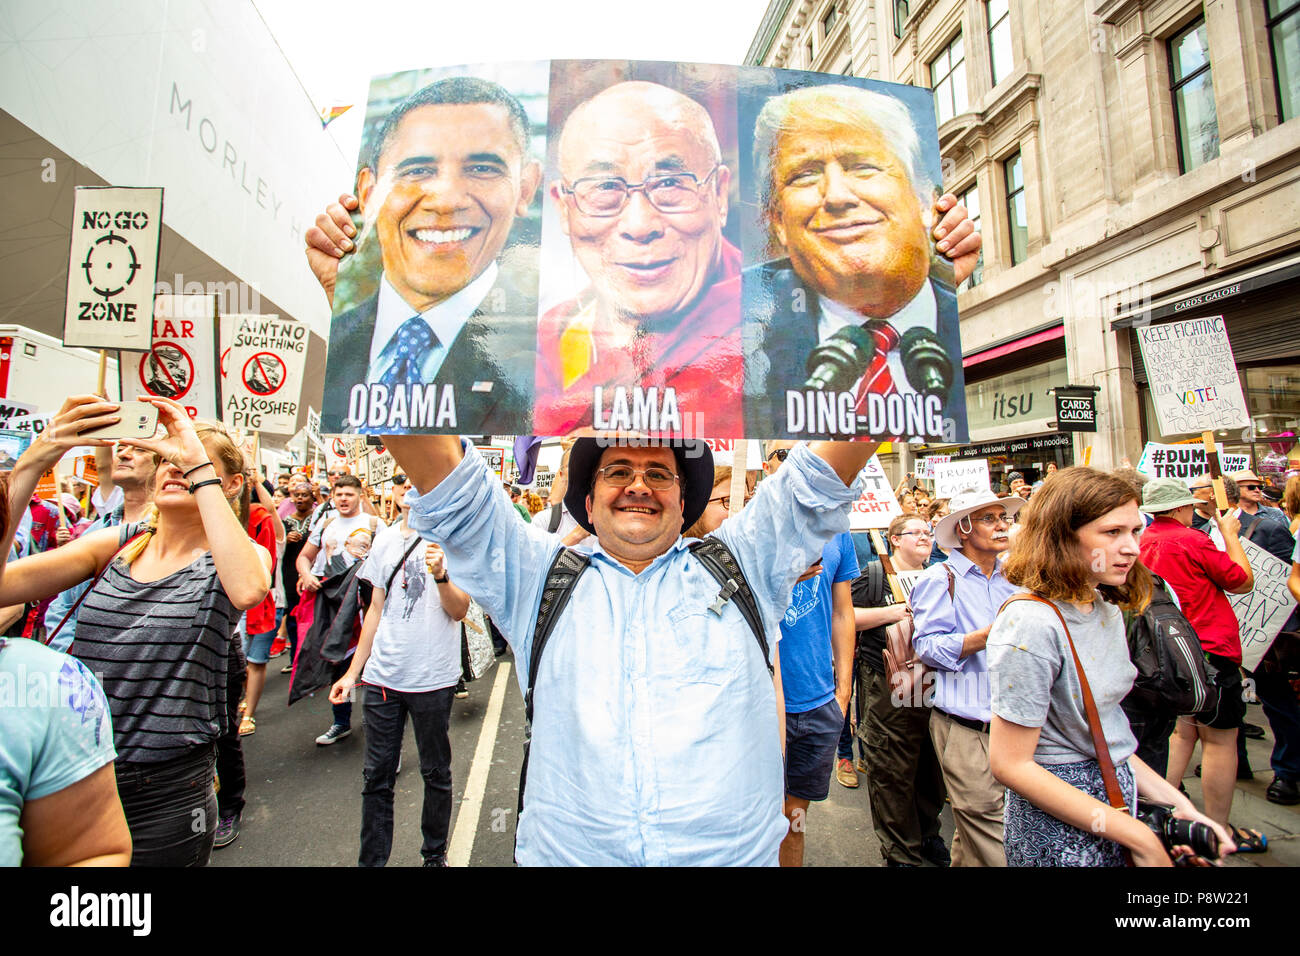 London/United Kingdom - July 13, 2018: Protests against Donald Trump continue with a march in central London ending up in Trafalgar Square for a rally. Some signs were very creative. Credit: Martin Leitch/Alamy Live News Stock Photo